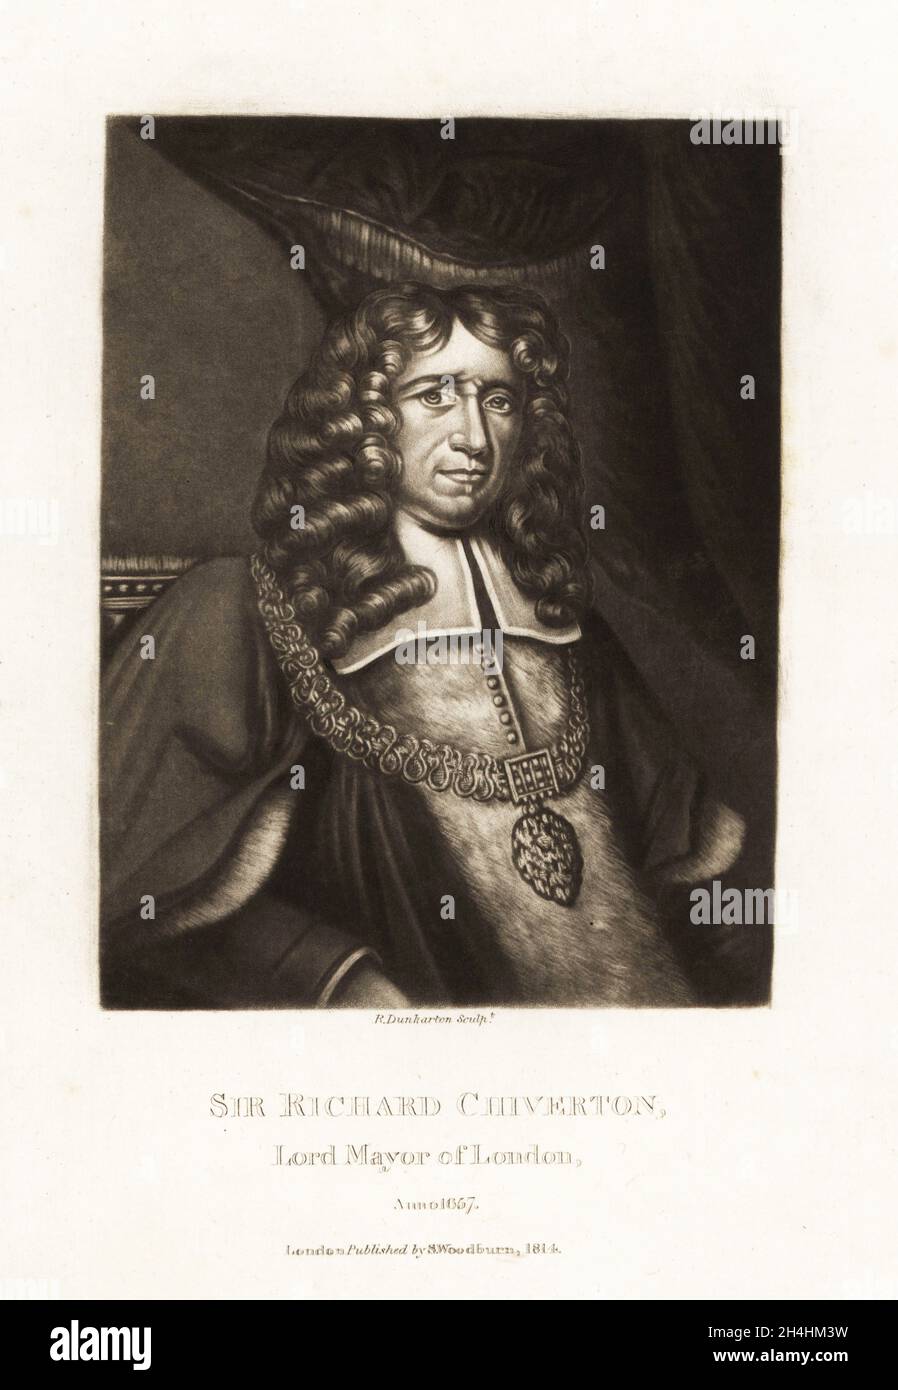 Sir Richard Chiverton, Lord Mayor of London, 1657-58, in ceremonial robes and chain. Member of the Worshipful Company of Skinners, kinghted by Oliver Cromwell and again by King Charles II at the Restoration. Mezzotint engraving by Robert Dunkarton after a portrait by Sir Anthony van Dyck from Richard Earlom and Charles Turner's Portraits of Characters Illustrious in British History Engraved in Mezzotinto, published by S. Woodburn, London, 1814. Stock Photo